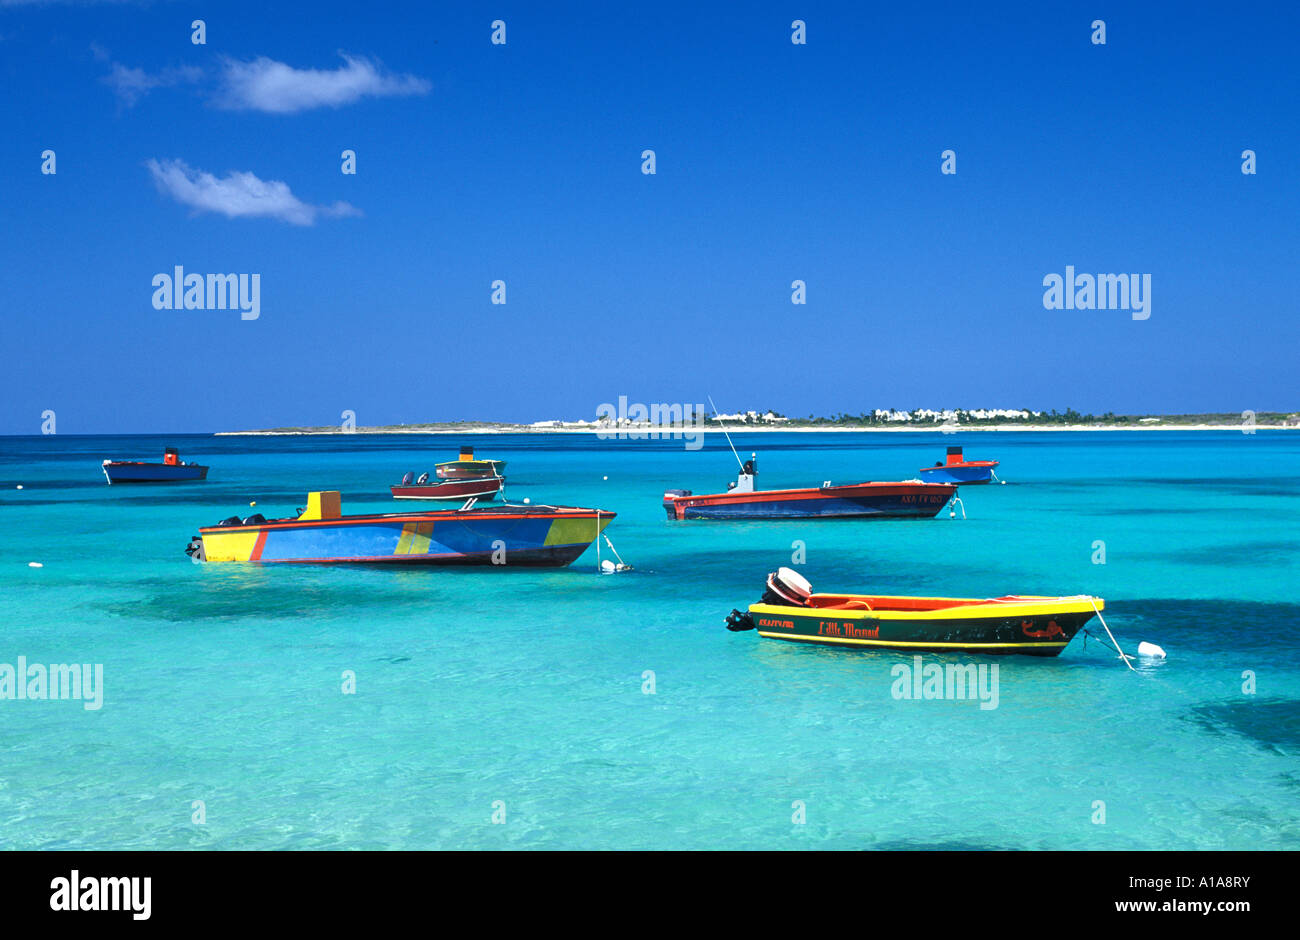 Anguilla caribbean green water yellow red fishing boats blue sky background iconic island symbol ideal perfect paradise Stock Photo